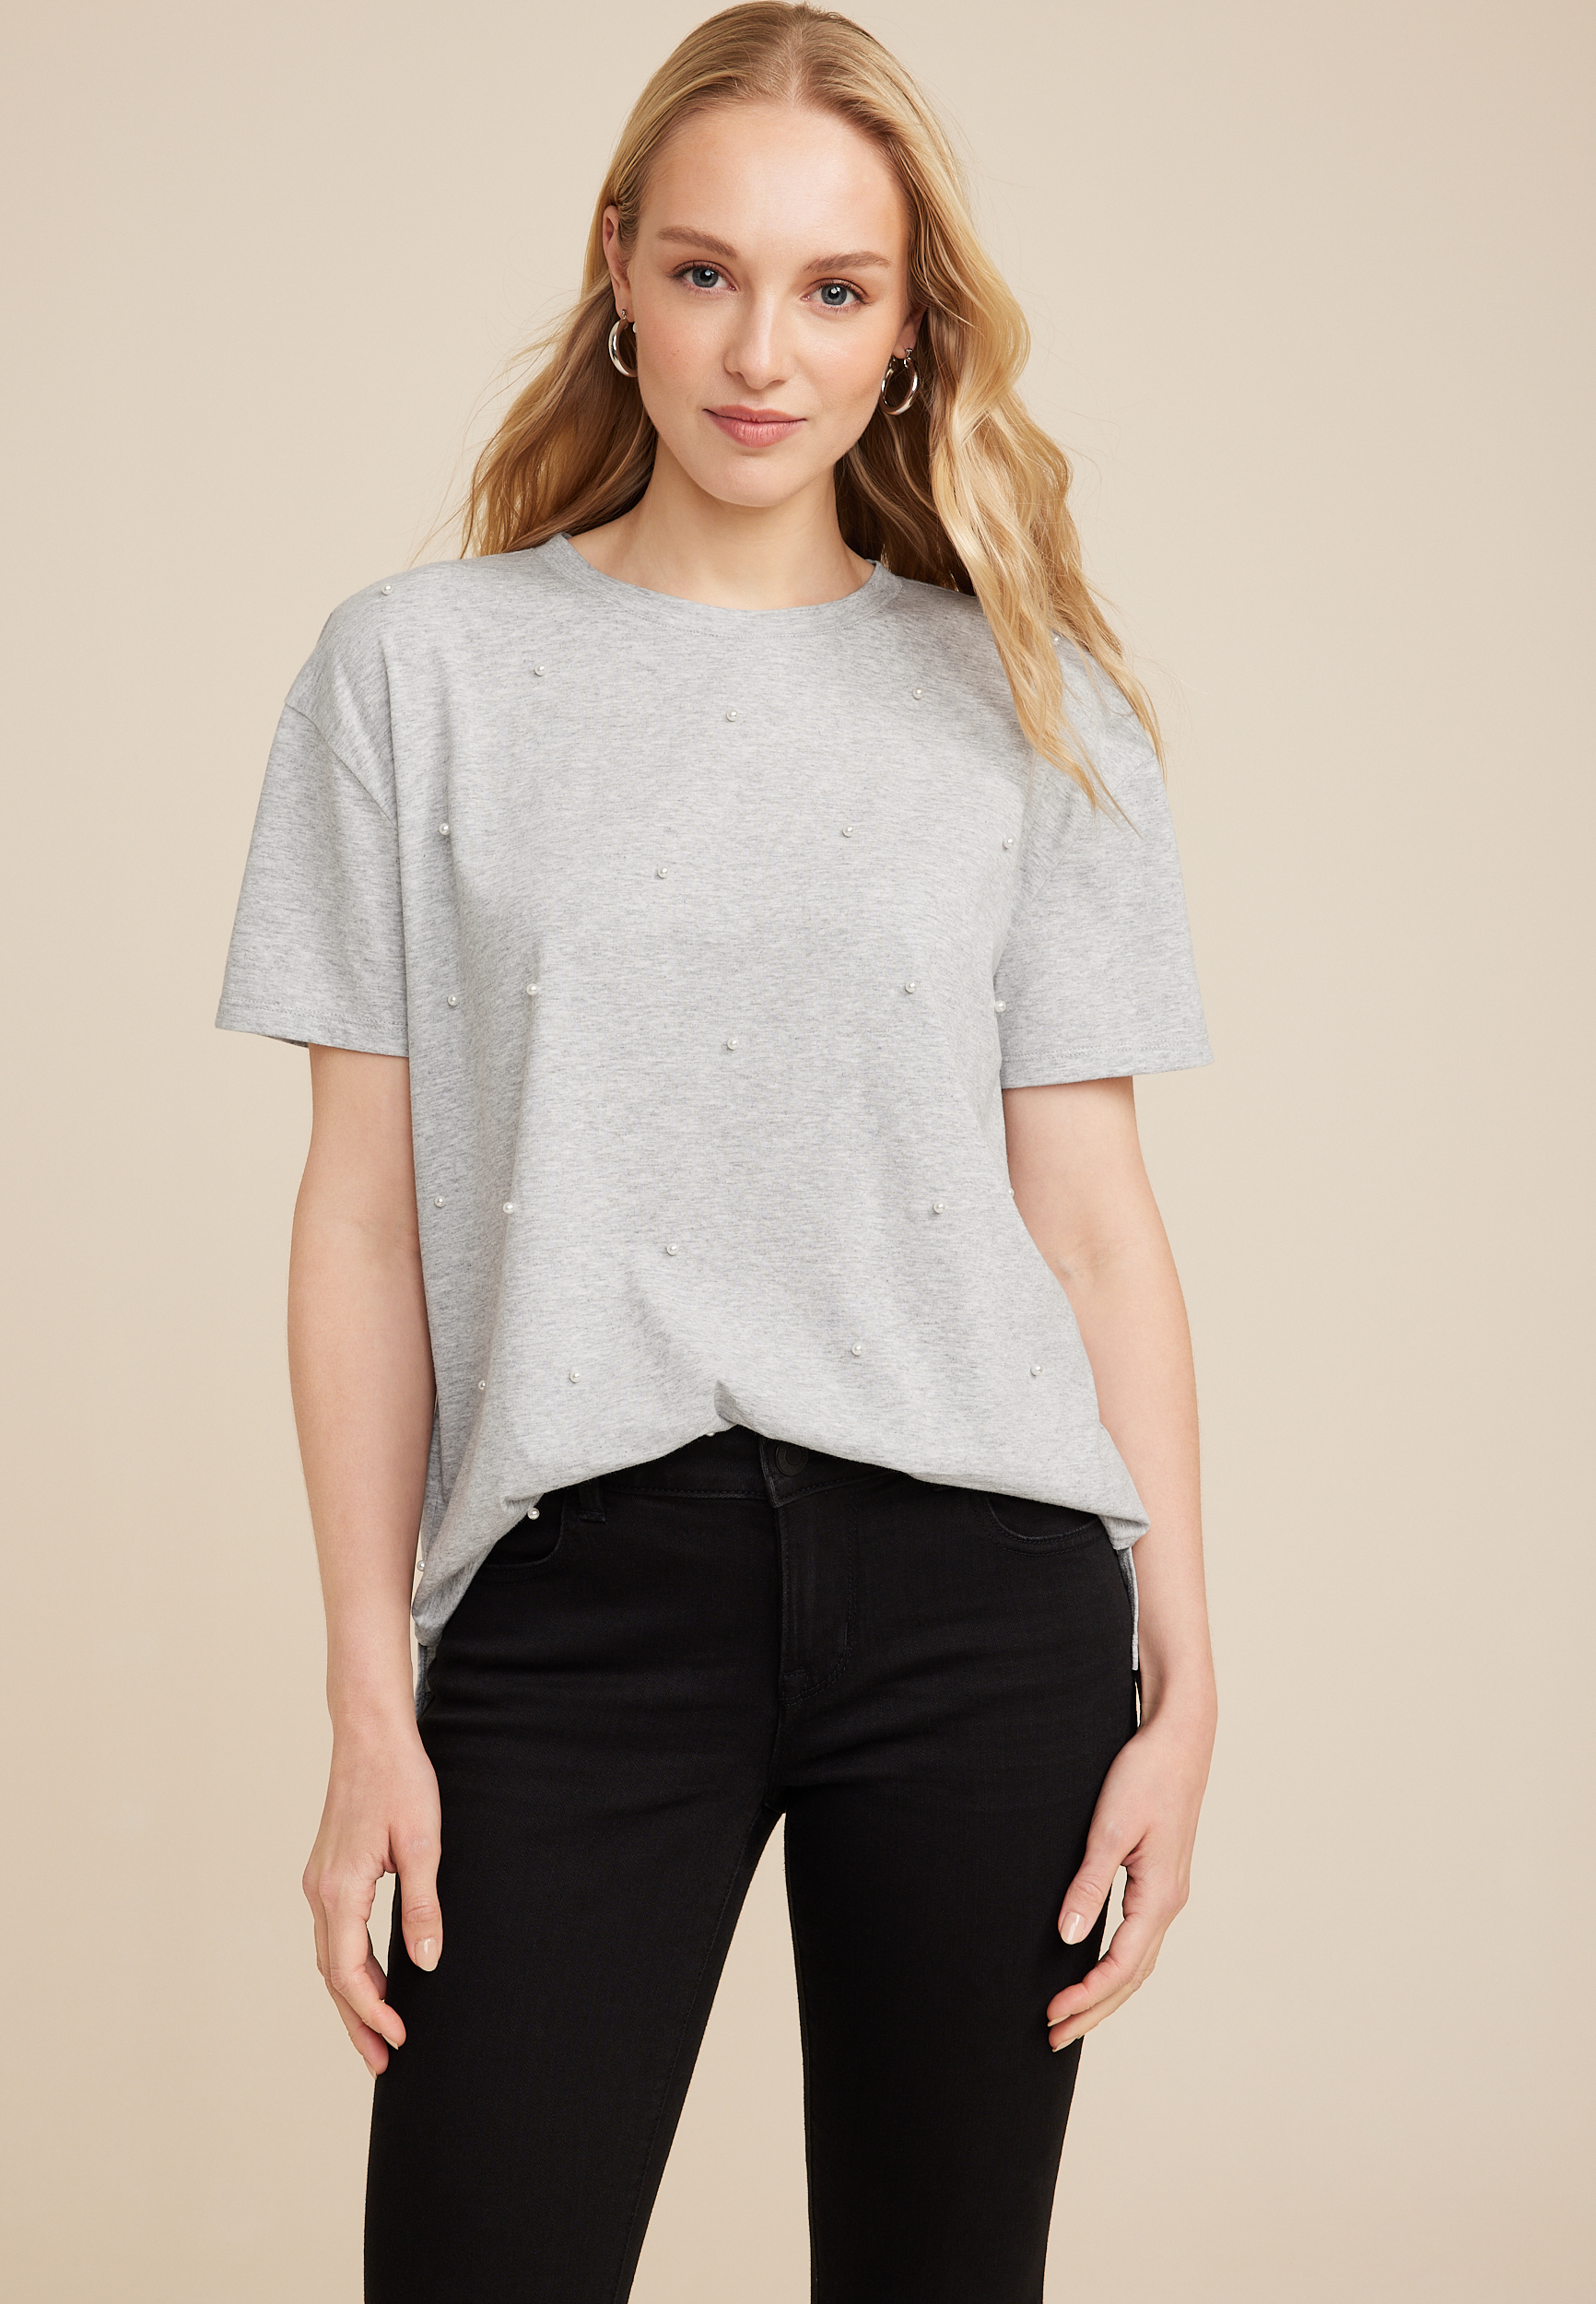 edgely™ Pearl Embellished Crew Neck Tee | maurices